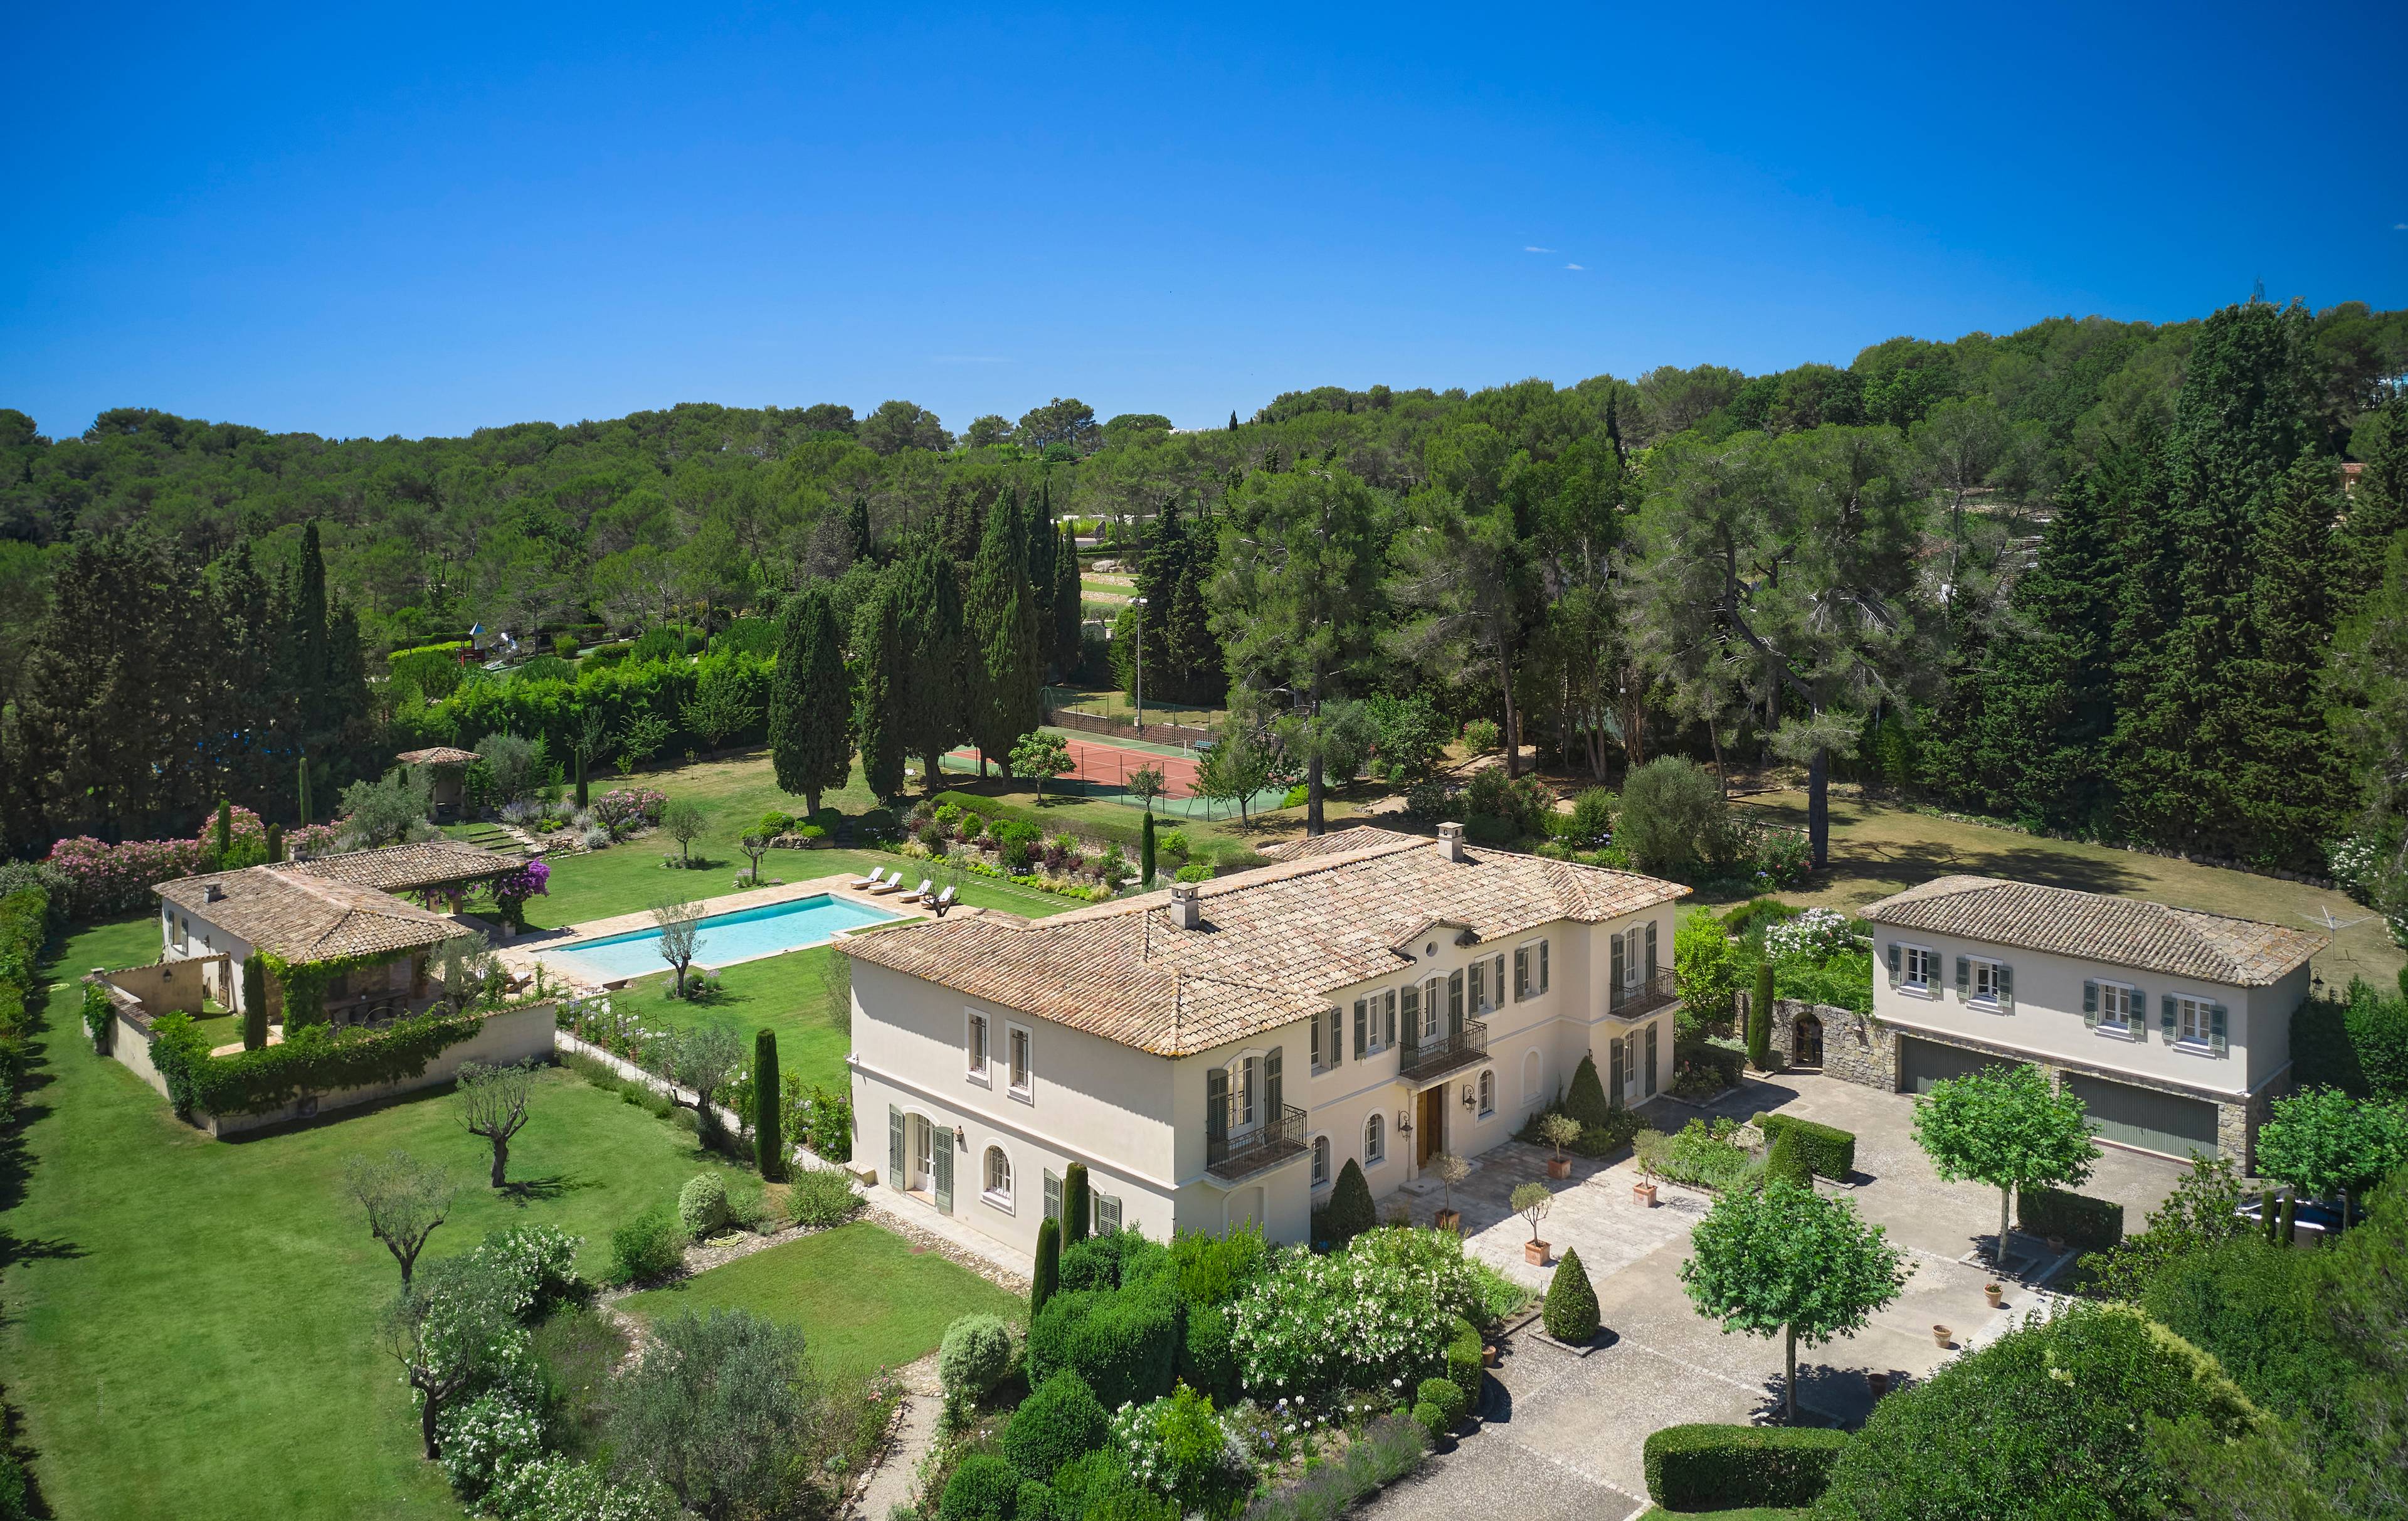 stunning luxury villa located in the heart of one of the most exclusive areas in Mougins .